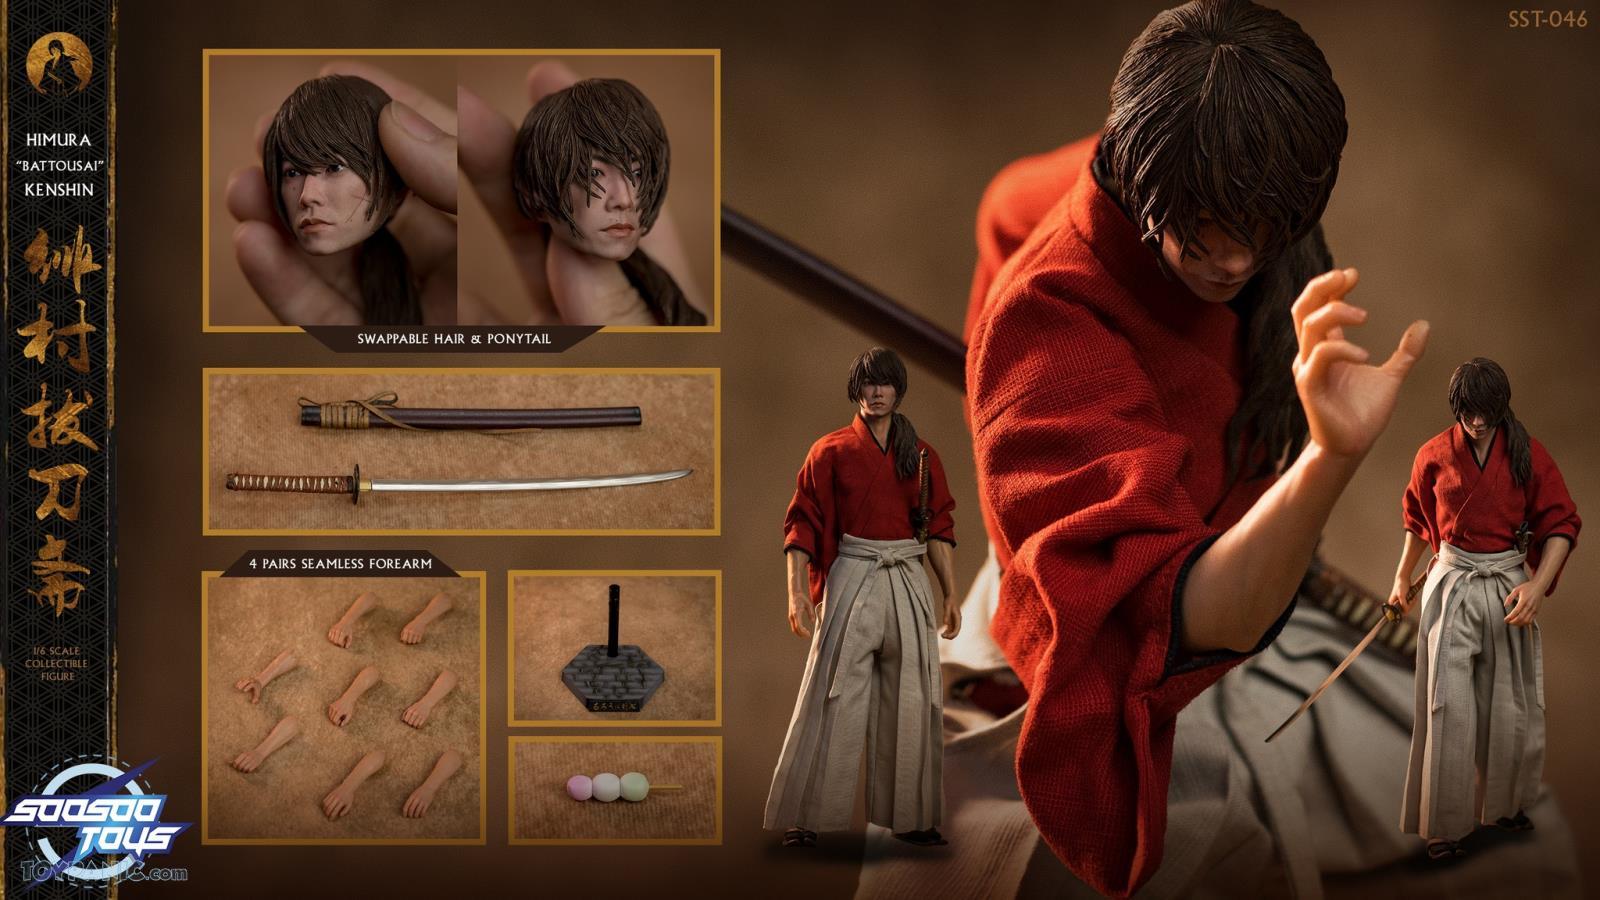 NEW PRODUCT: 1/6 scale Rurouni Kenshin Collectible Figure from SooSooToys 712202251234PM_474230